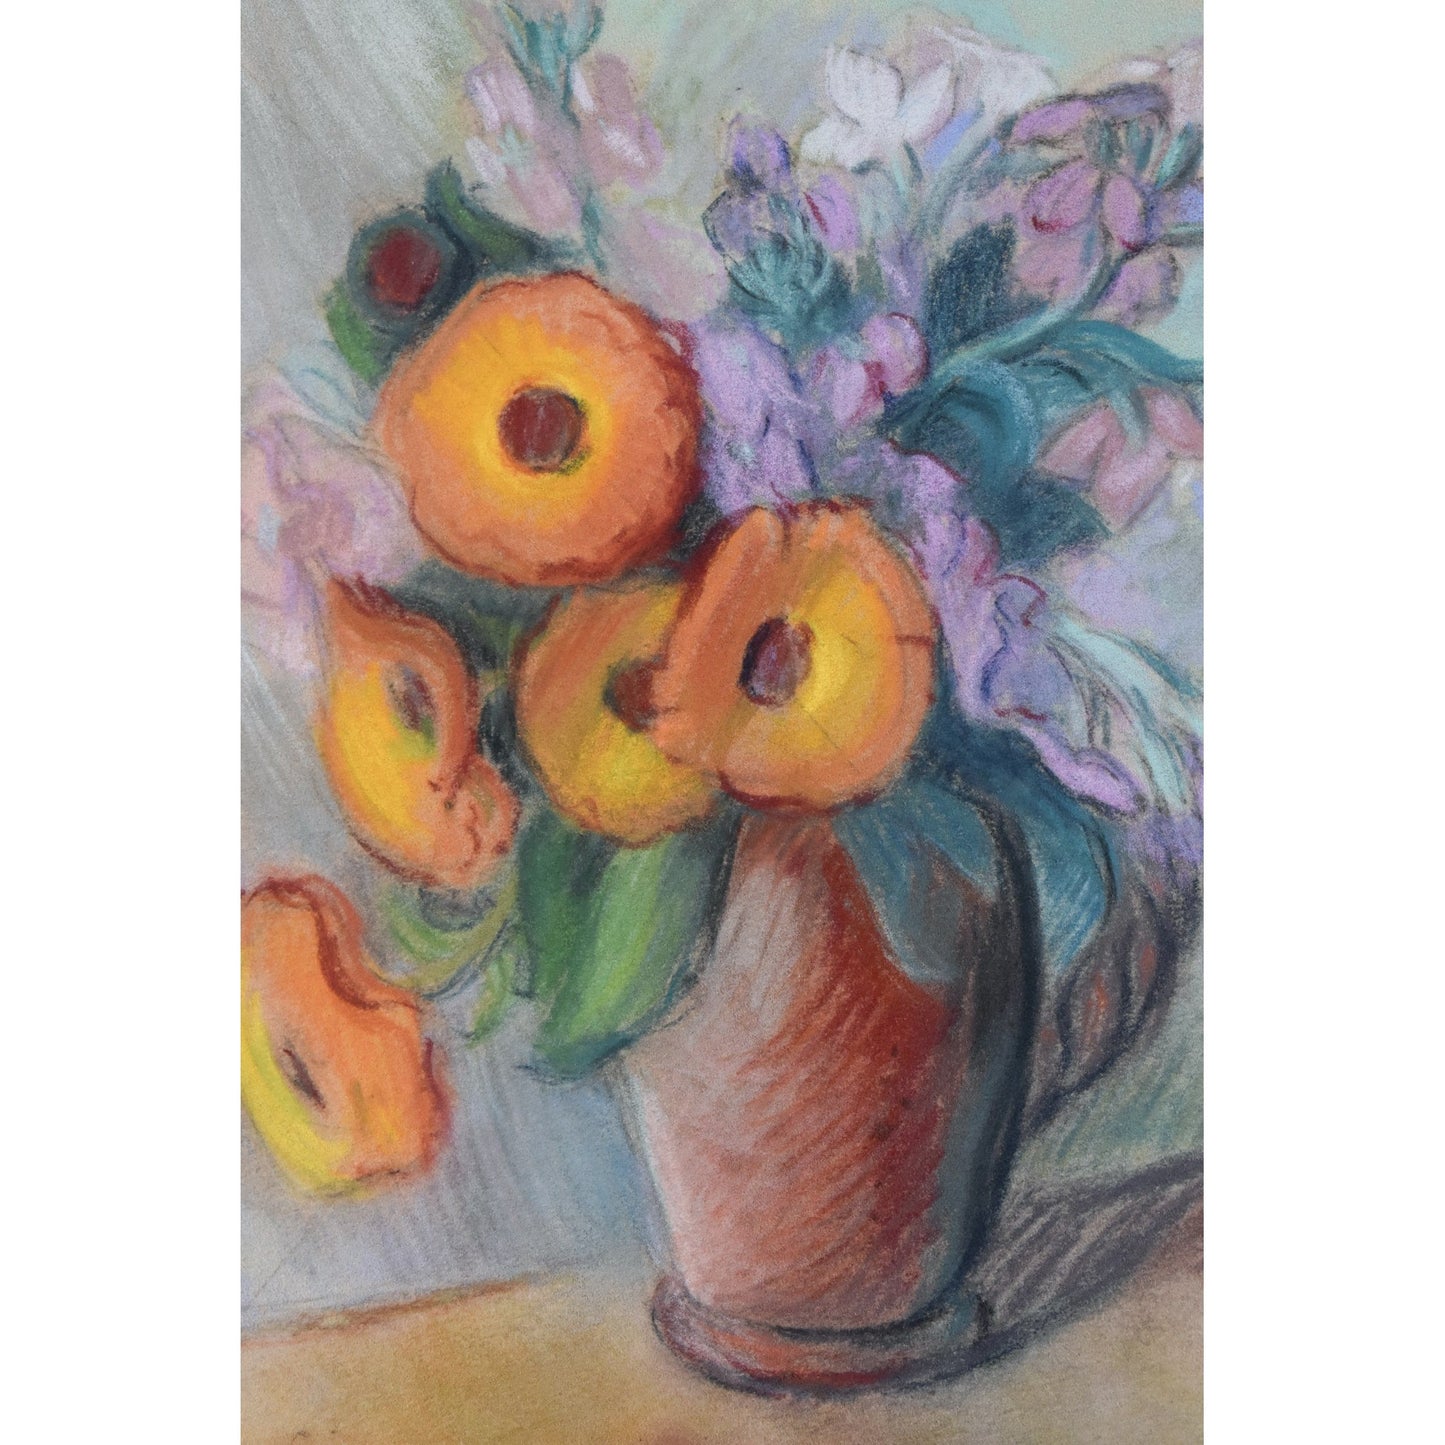 Vintage still life pastel painting, flowers in a vase circa 1950, by Claire Demartinécourt, for sale at Winckelmann Gallery